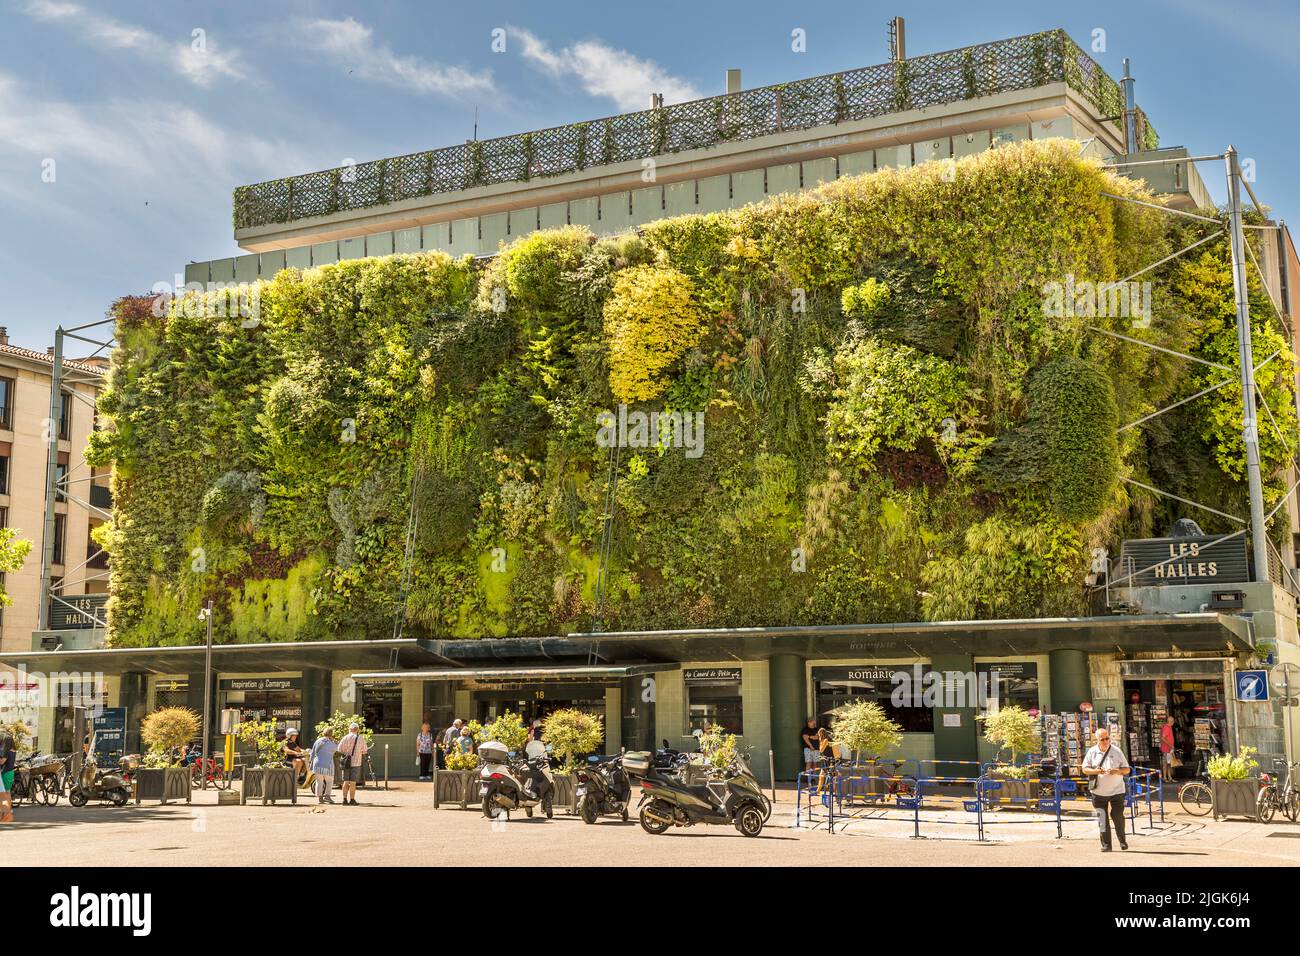 The outer facade of the Avignon (France) market hall is lush with plants. Les Halles market hall in Avignon. Patrick Blanc's plant wall has a sophisticated irrigation system and triggered a boom in vertical urban greening worldwide. 20 plants grow on one square meter Stock Photo